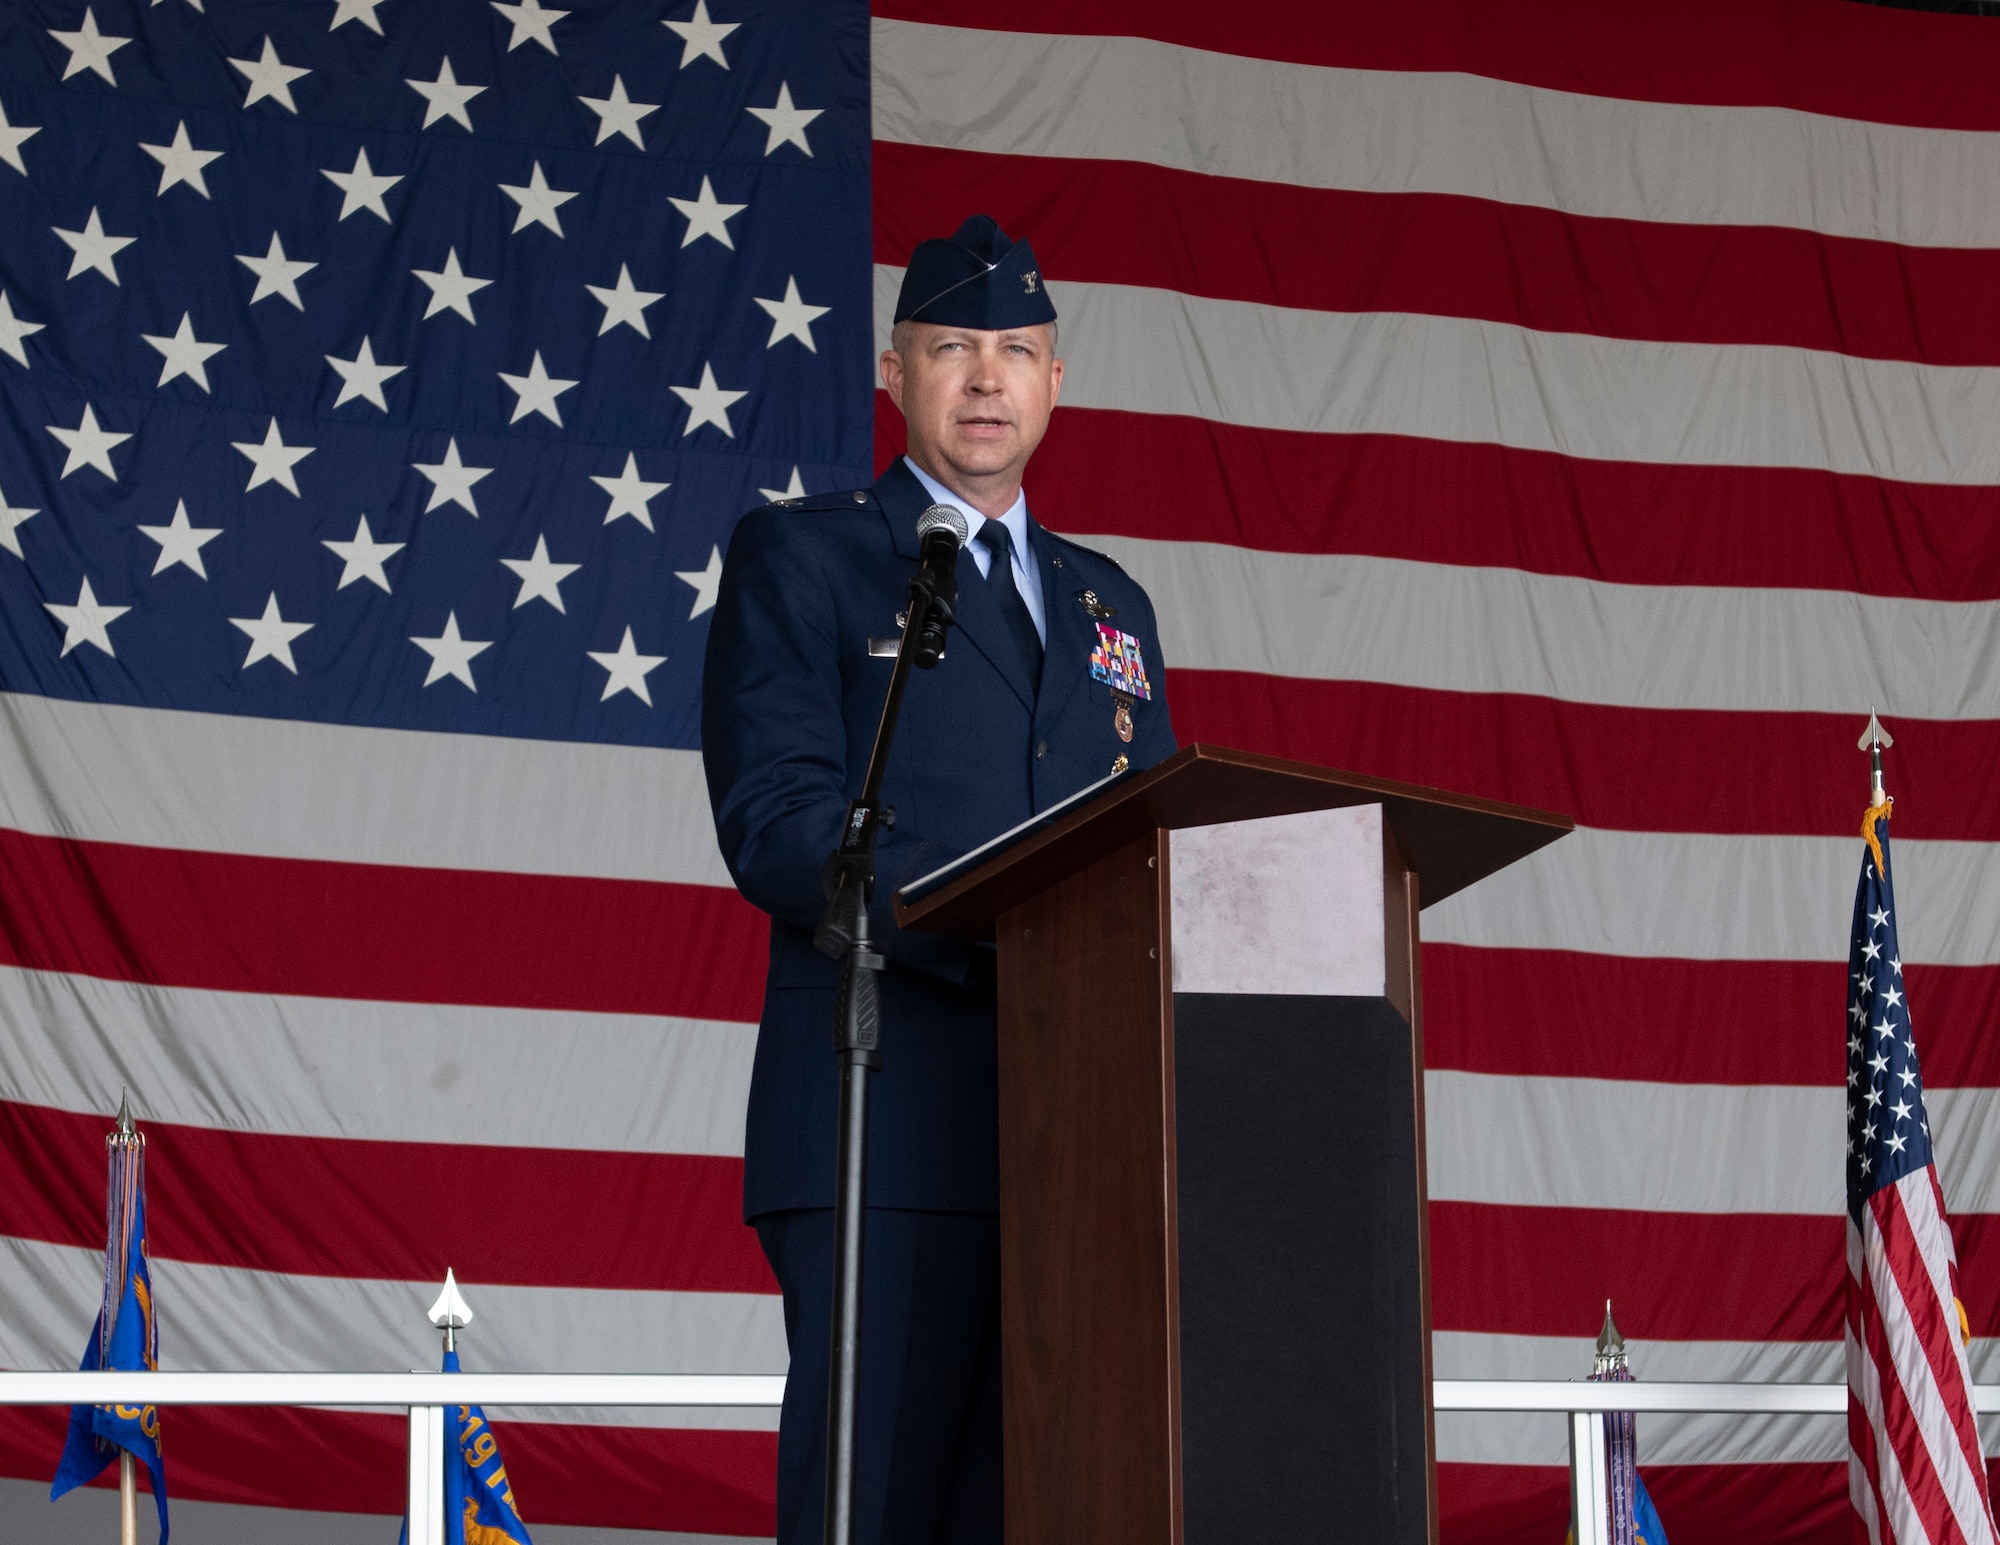 A man in a blue suit speaks at a podium in front of an American flag.